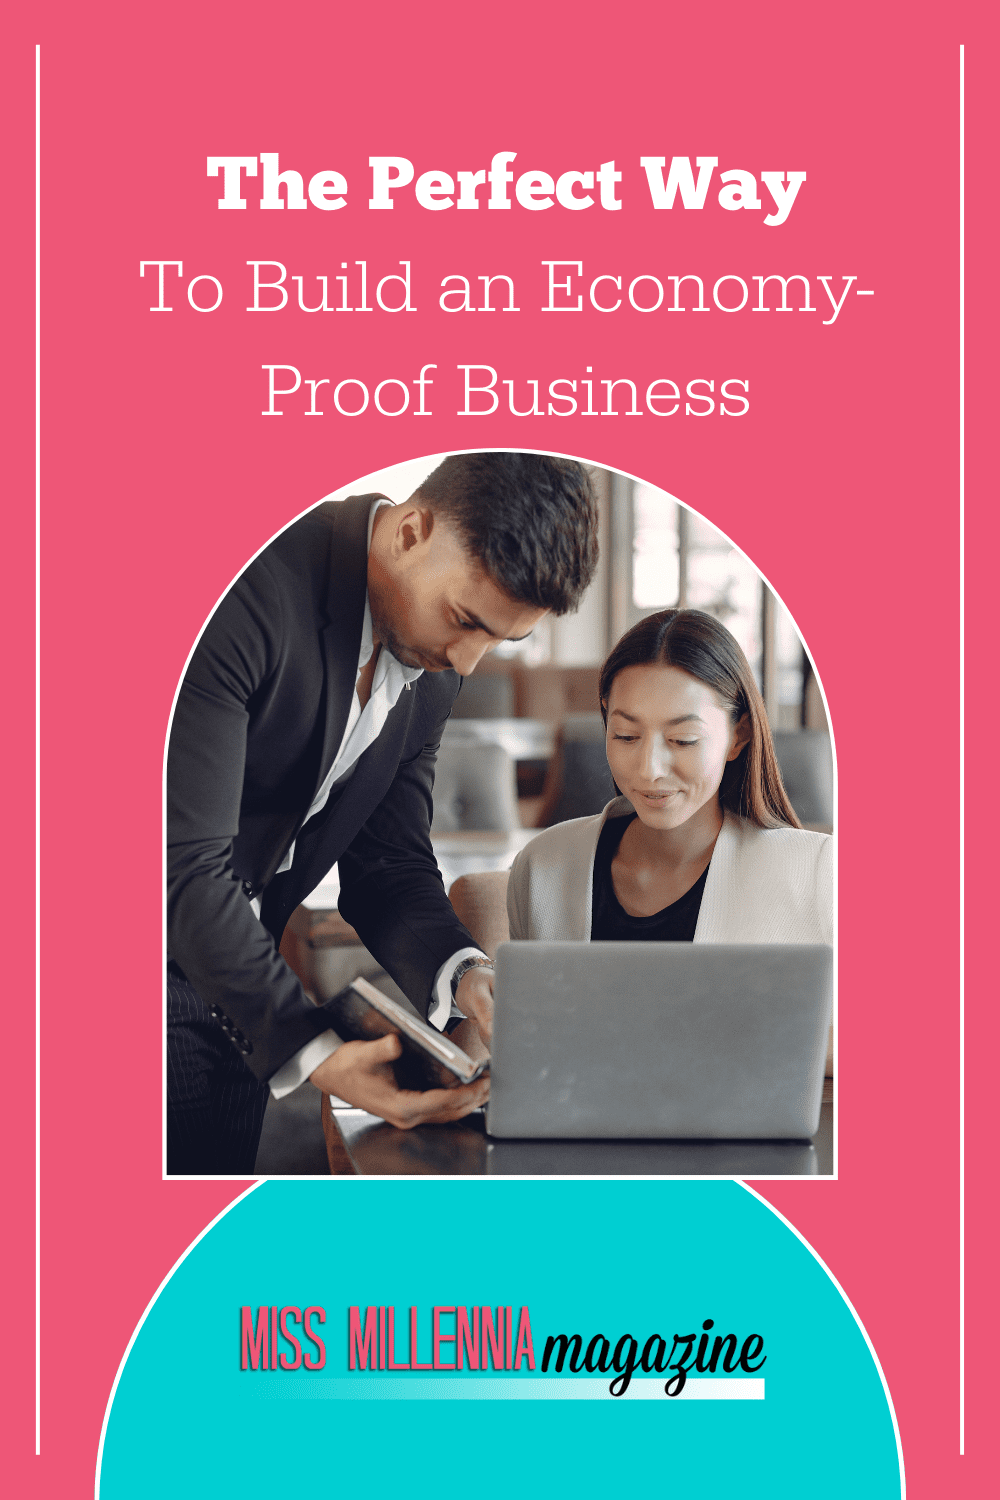 The Perfect Way to Build an Economy-Proof Business